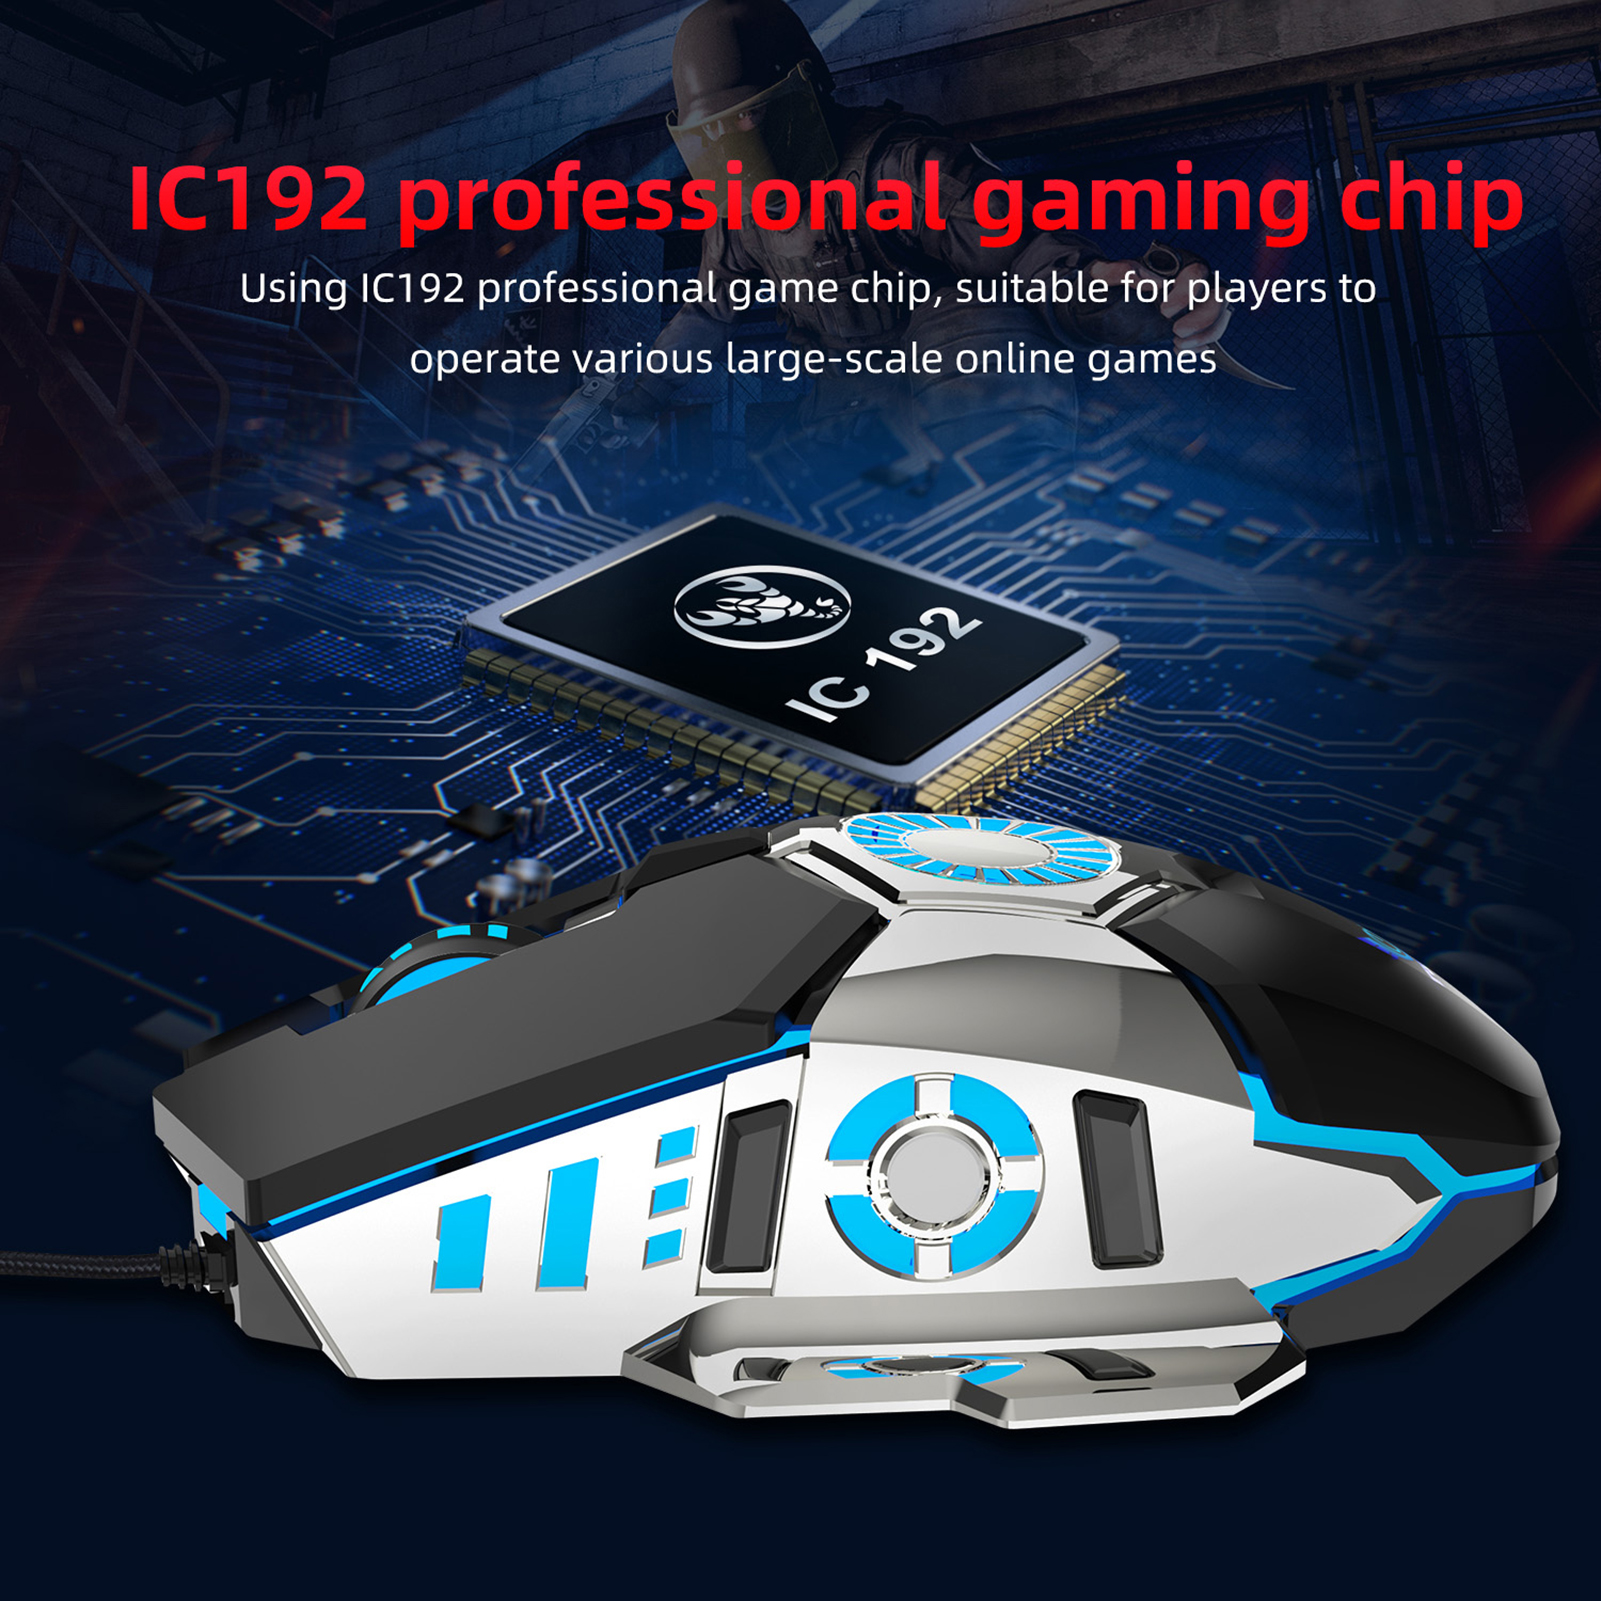 HXSJ J700 Macro Programmable Gaming Mouse Colorful Breathing Light Gaming Mouse with Adjustable DPI for PC Notebook